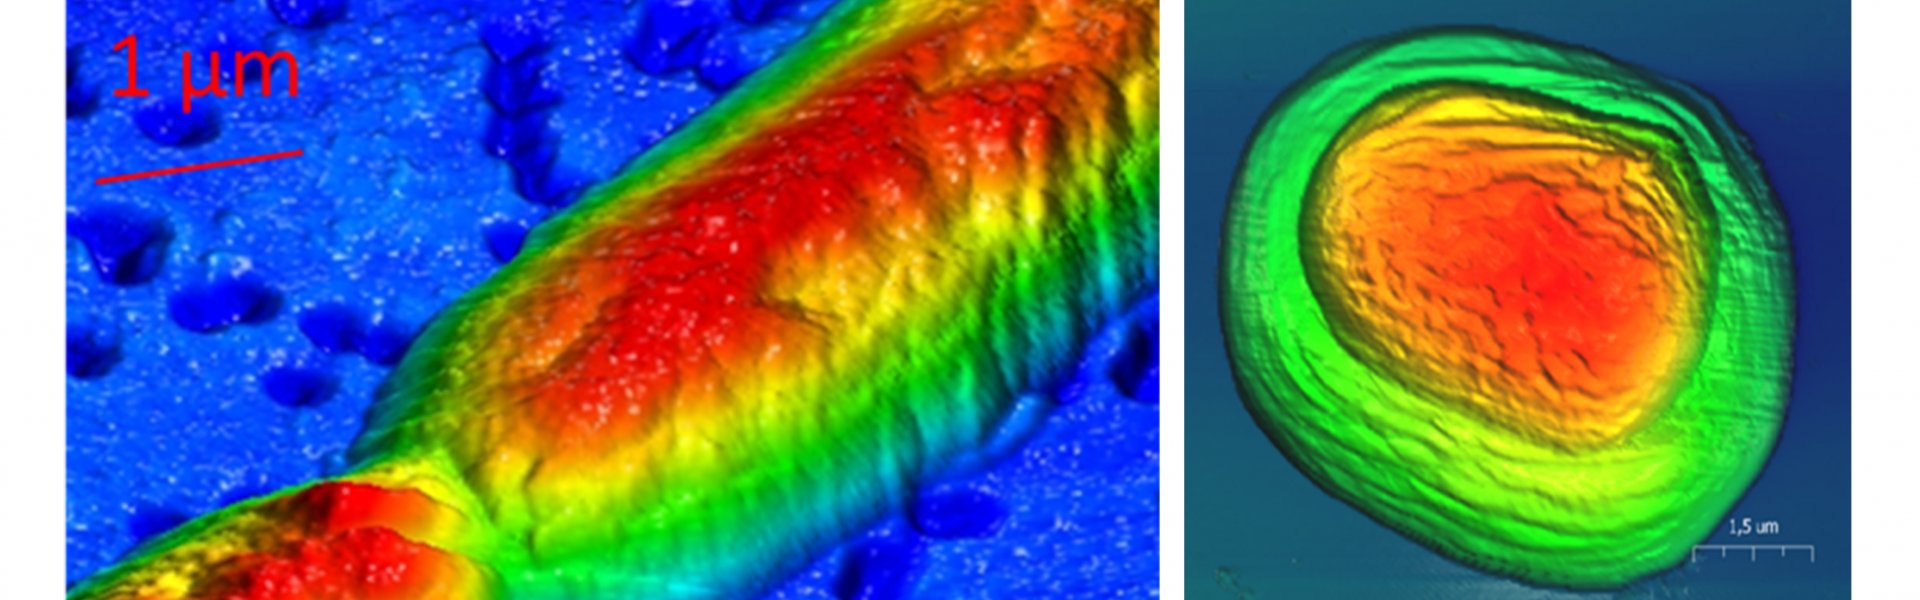 Crenothrix Filament, Lake Zug 2014 (left) and AFM-image of a Chromatium Okenii cell from Lago di Cadagno, Switzerland, treated with Crytical Point dryer (©Max Planck Institute for Marine Microbiology, D. Tienken)